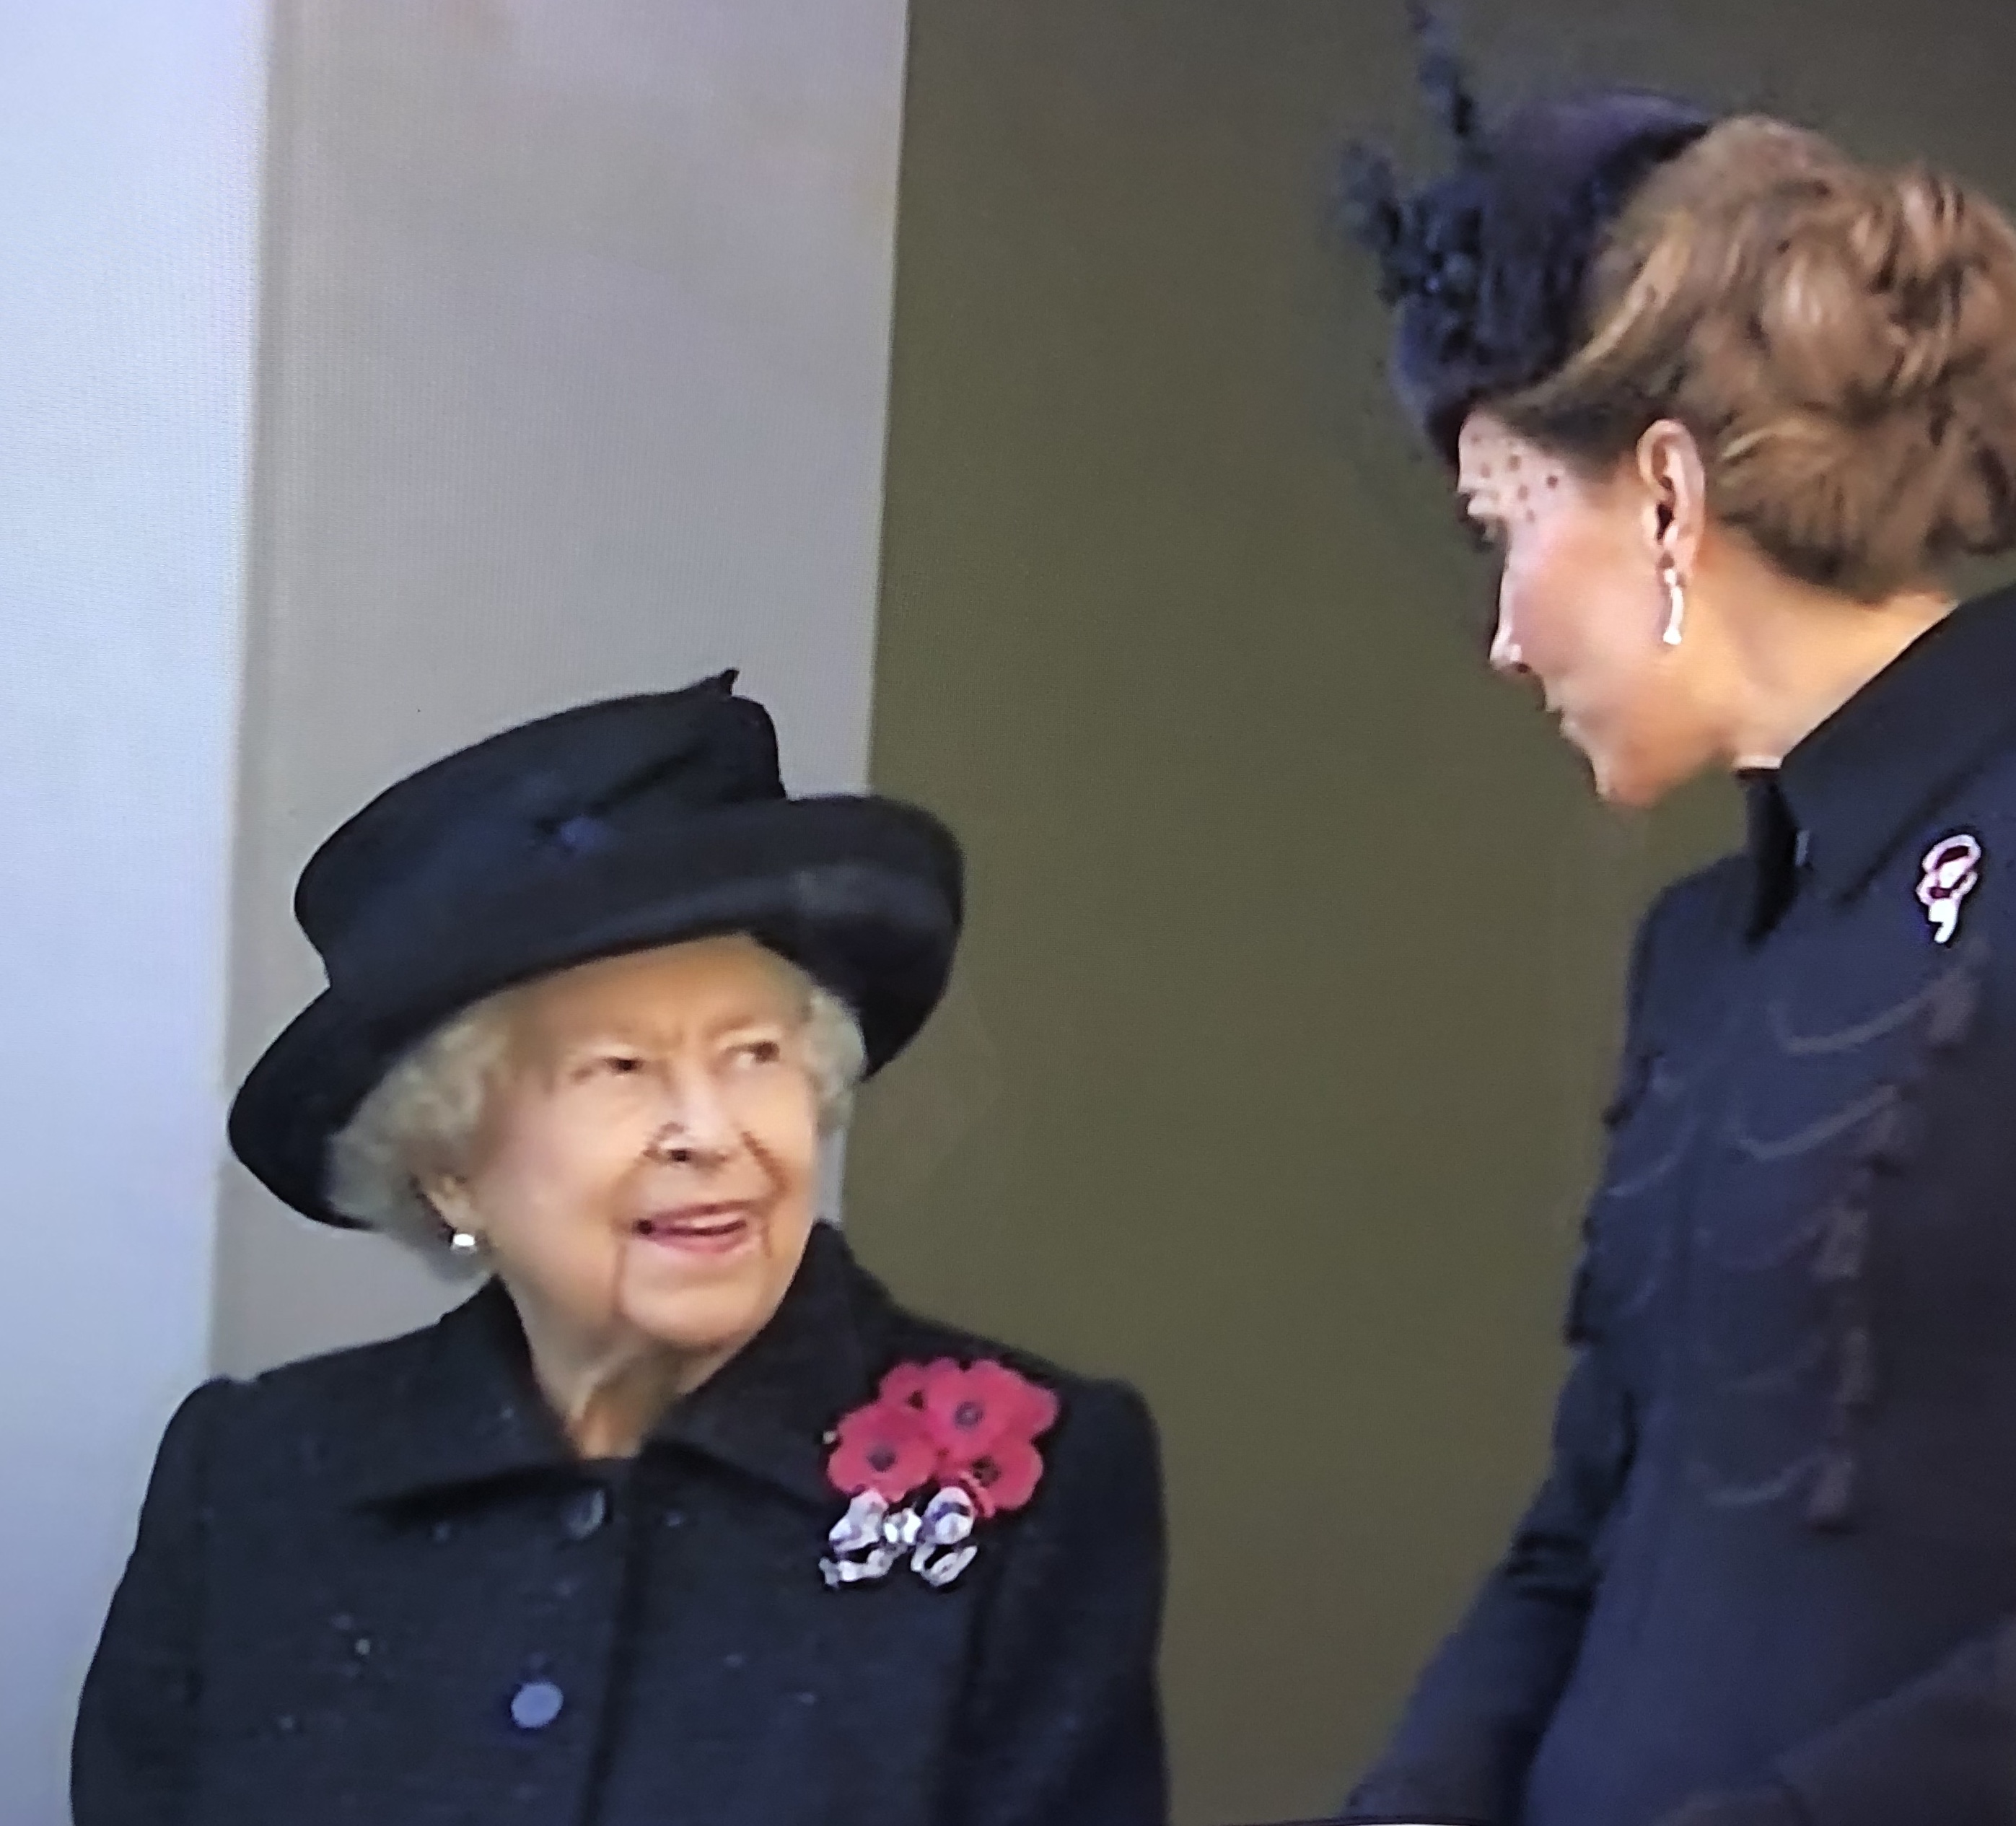 The Queen and the Duchess of Cambridge watched the ceremony from a  balcony.